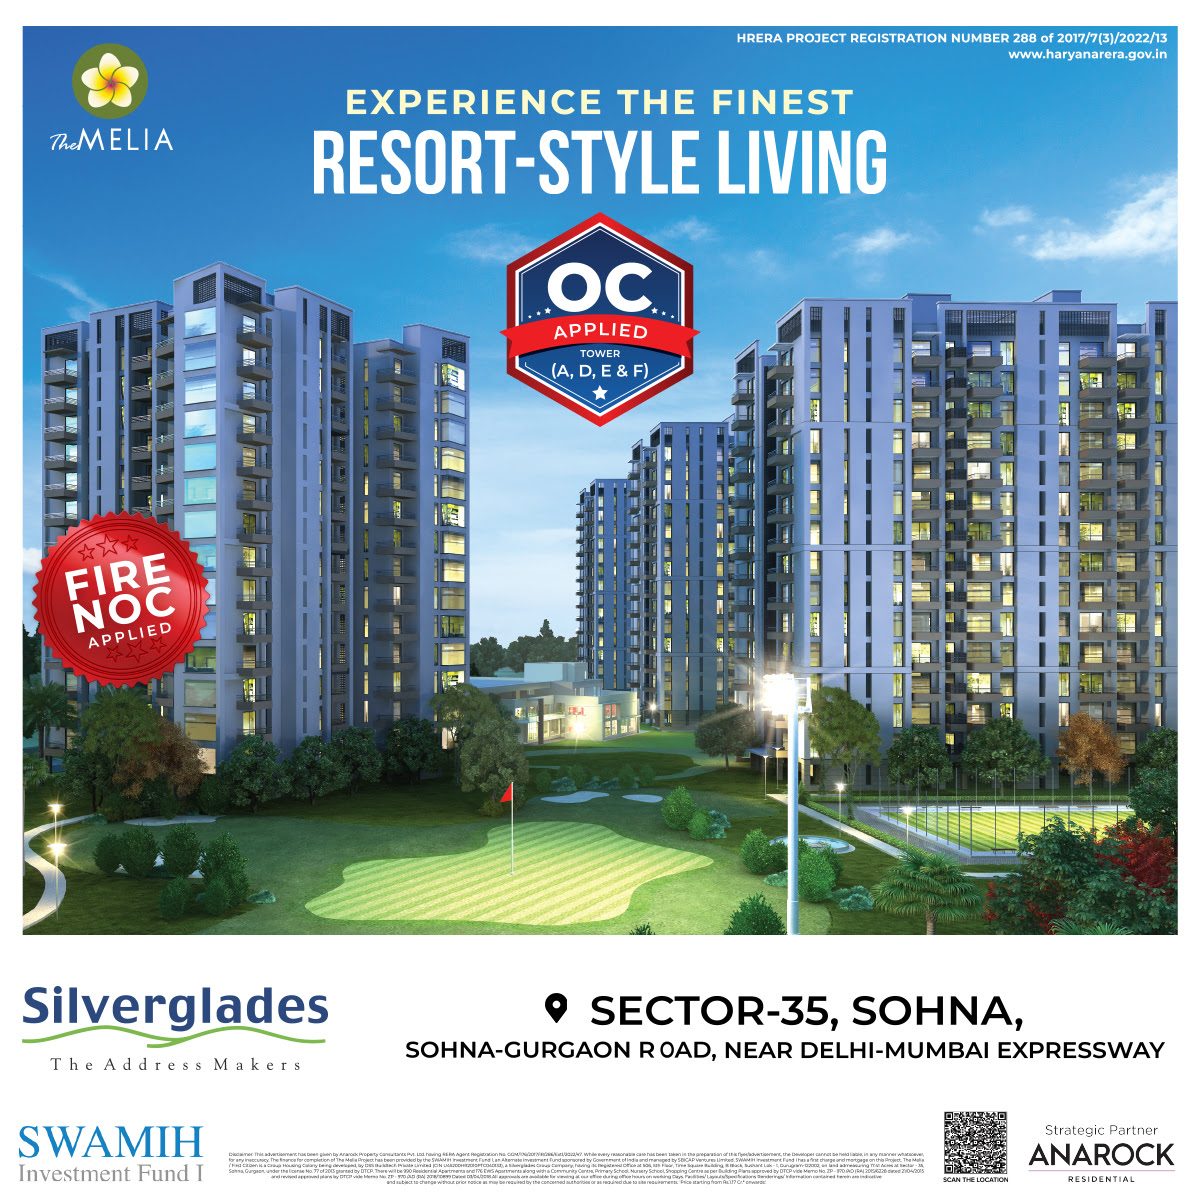 Experience the finest resort style living at Silverglades The Melia in Sohna, Gurgaon Update